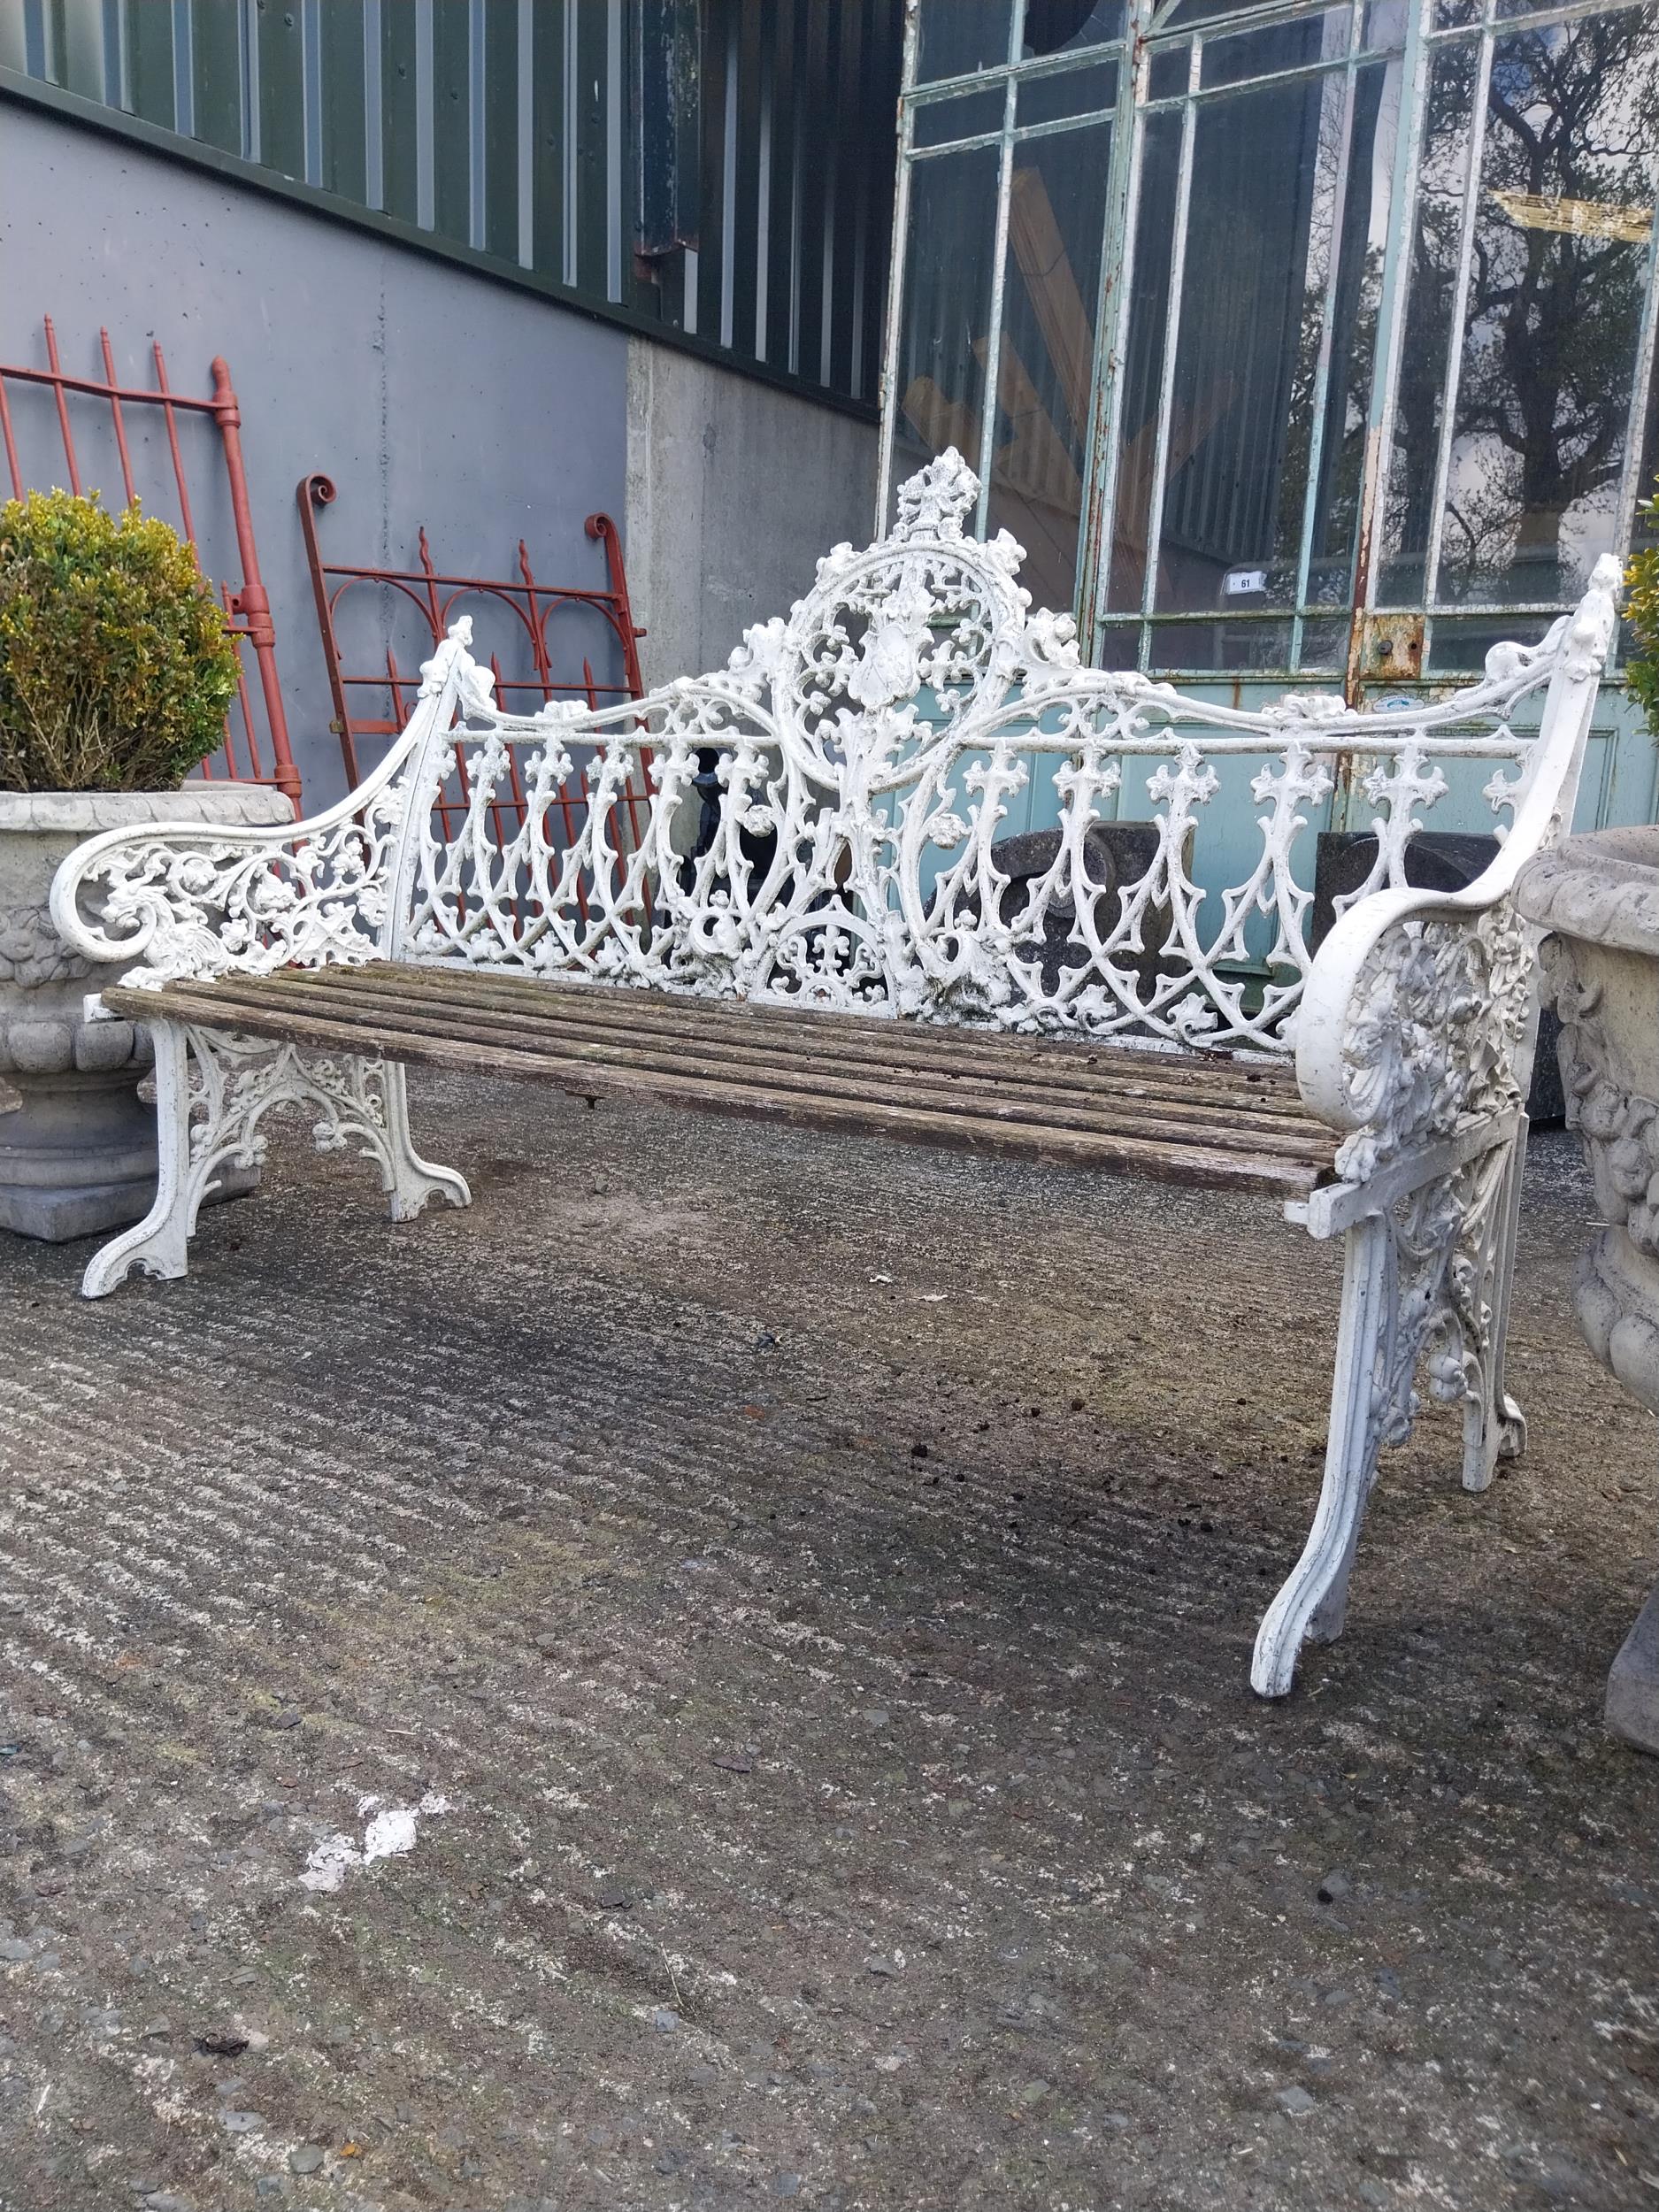 Decorative cast alloy garden bench in the Victorian style {99 cm H x 150 cm W x 68 cm D}. - Image 4 of 8